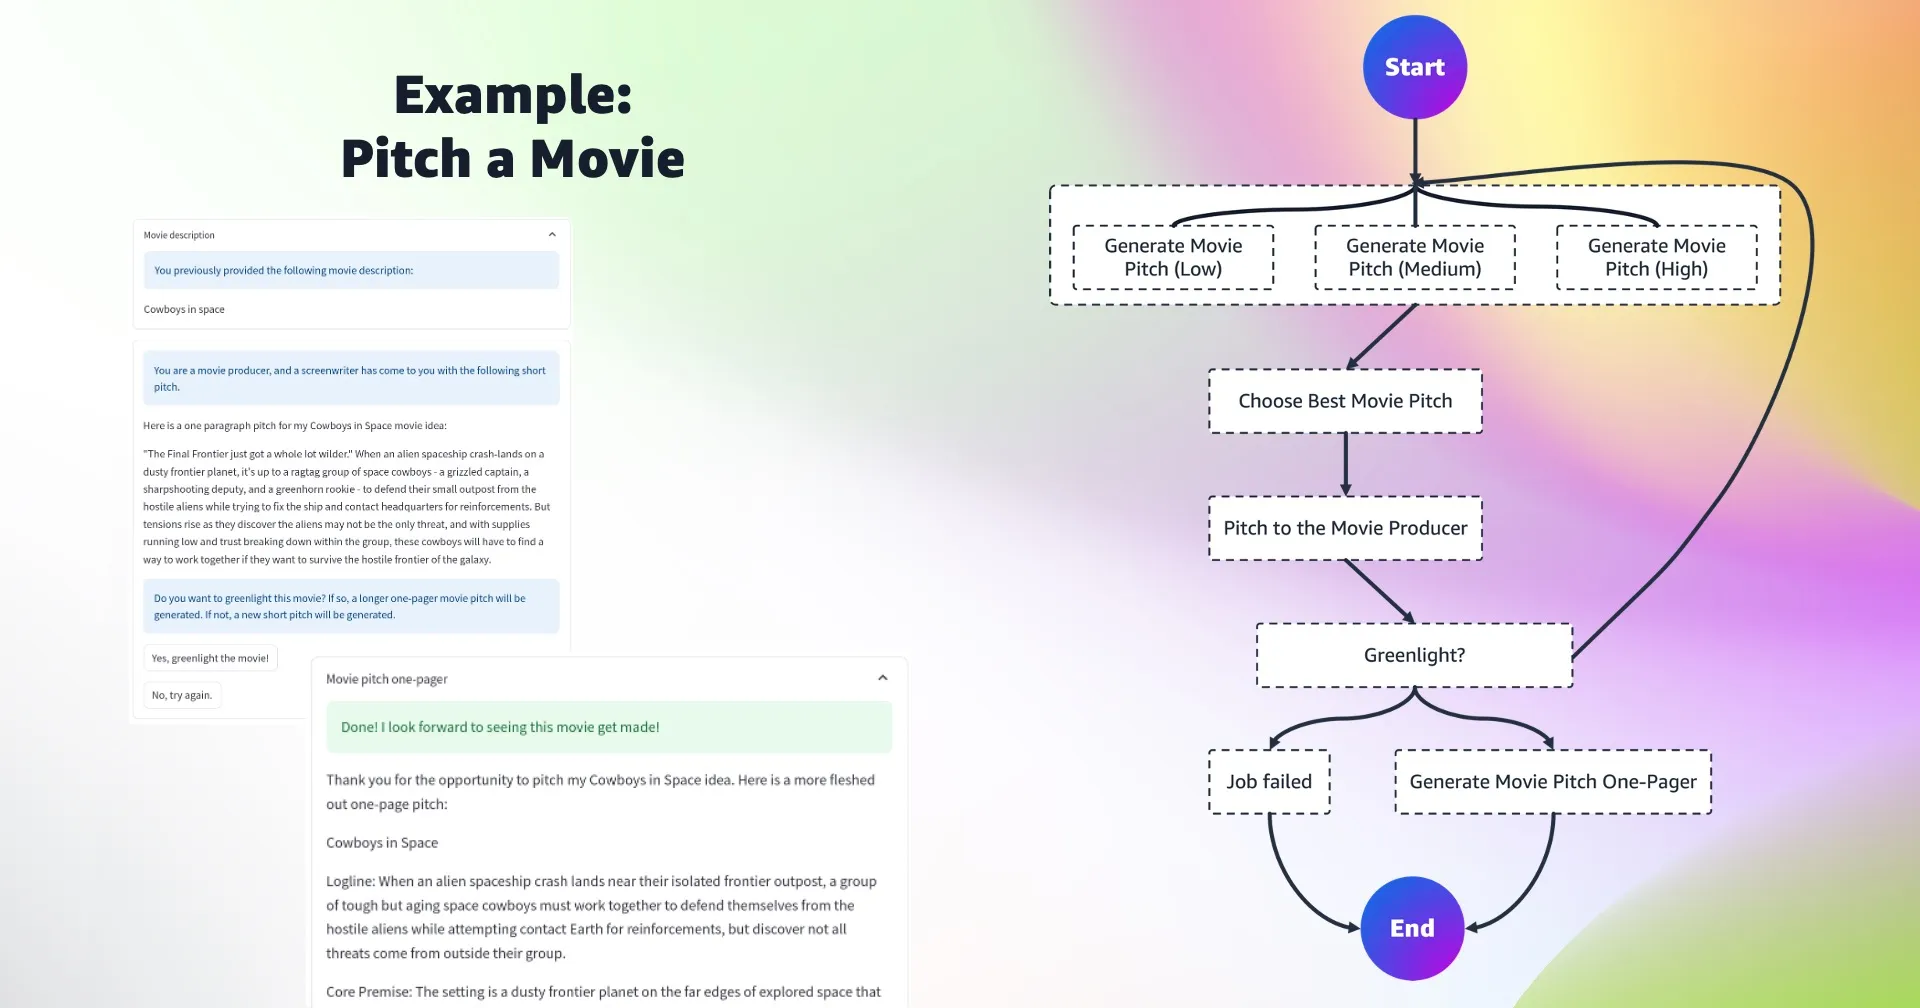 Interactive workflow generates parallel movie pitch ideas, lets user approve or reject for longer pi